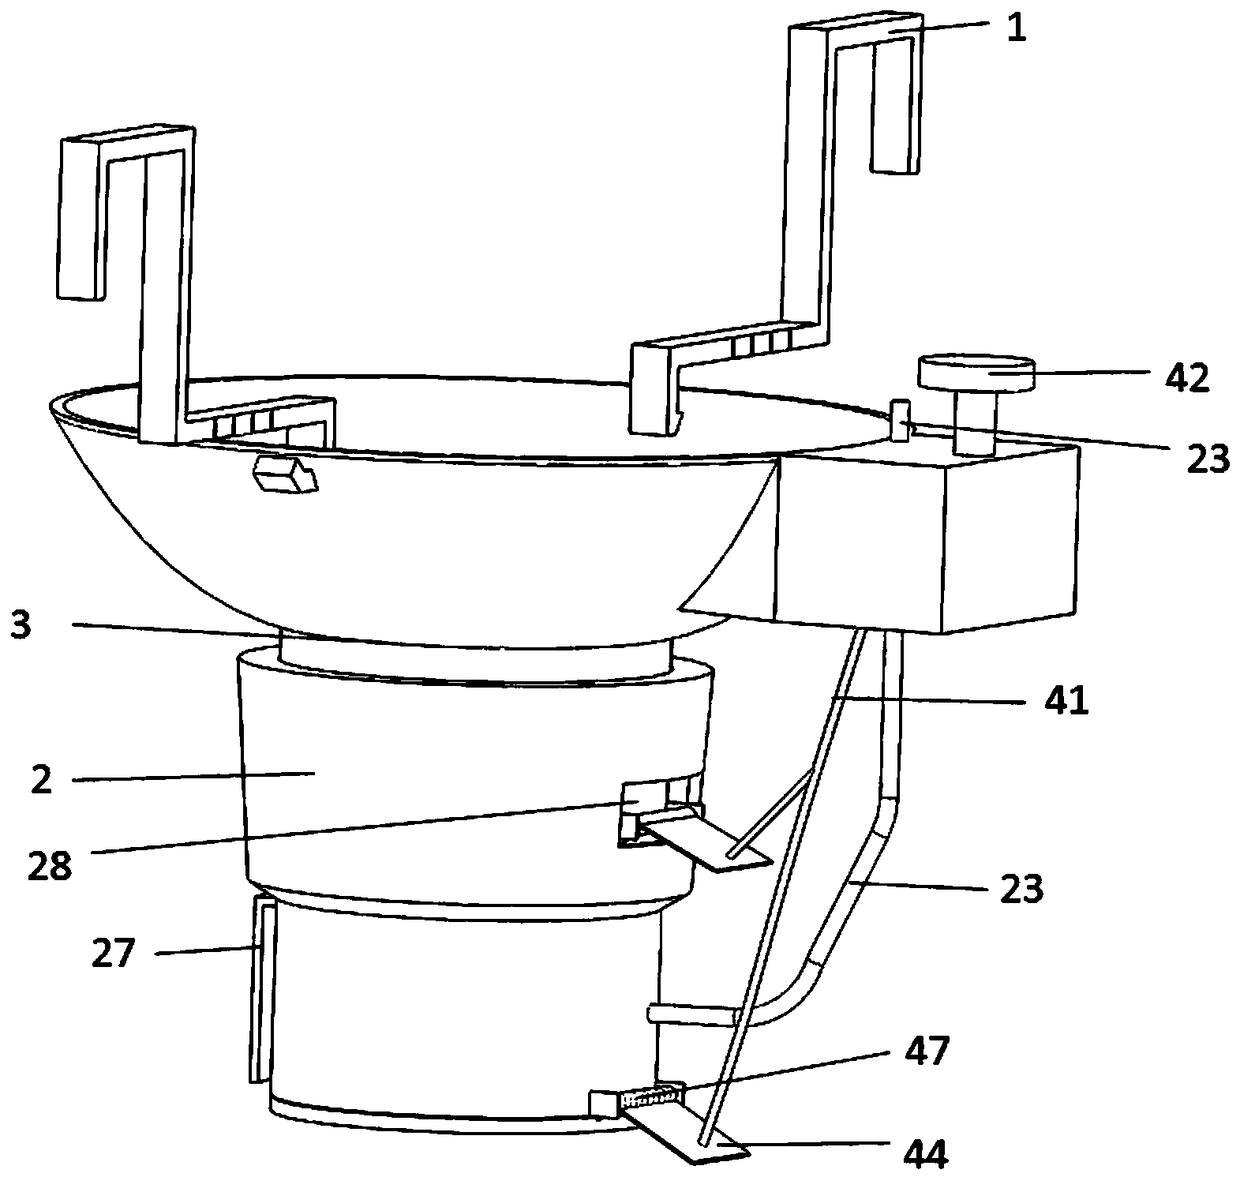 Adjustable urinary and feces meter applied to toilet bowl